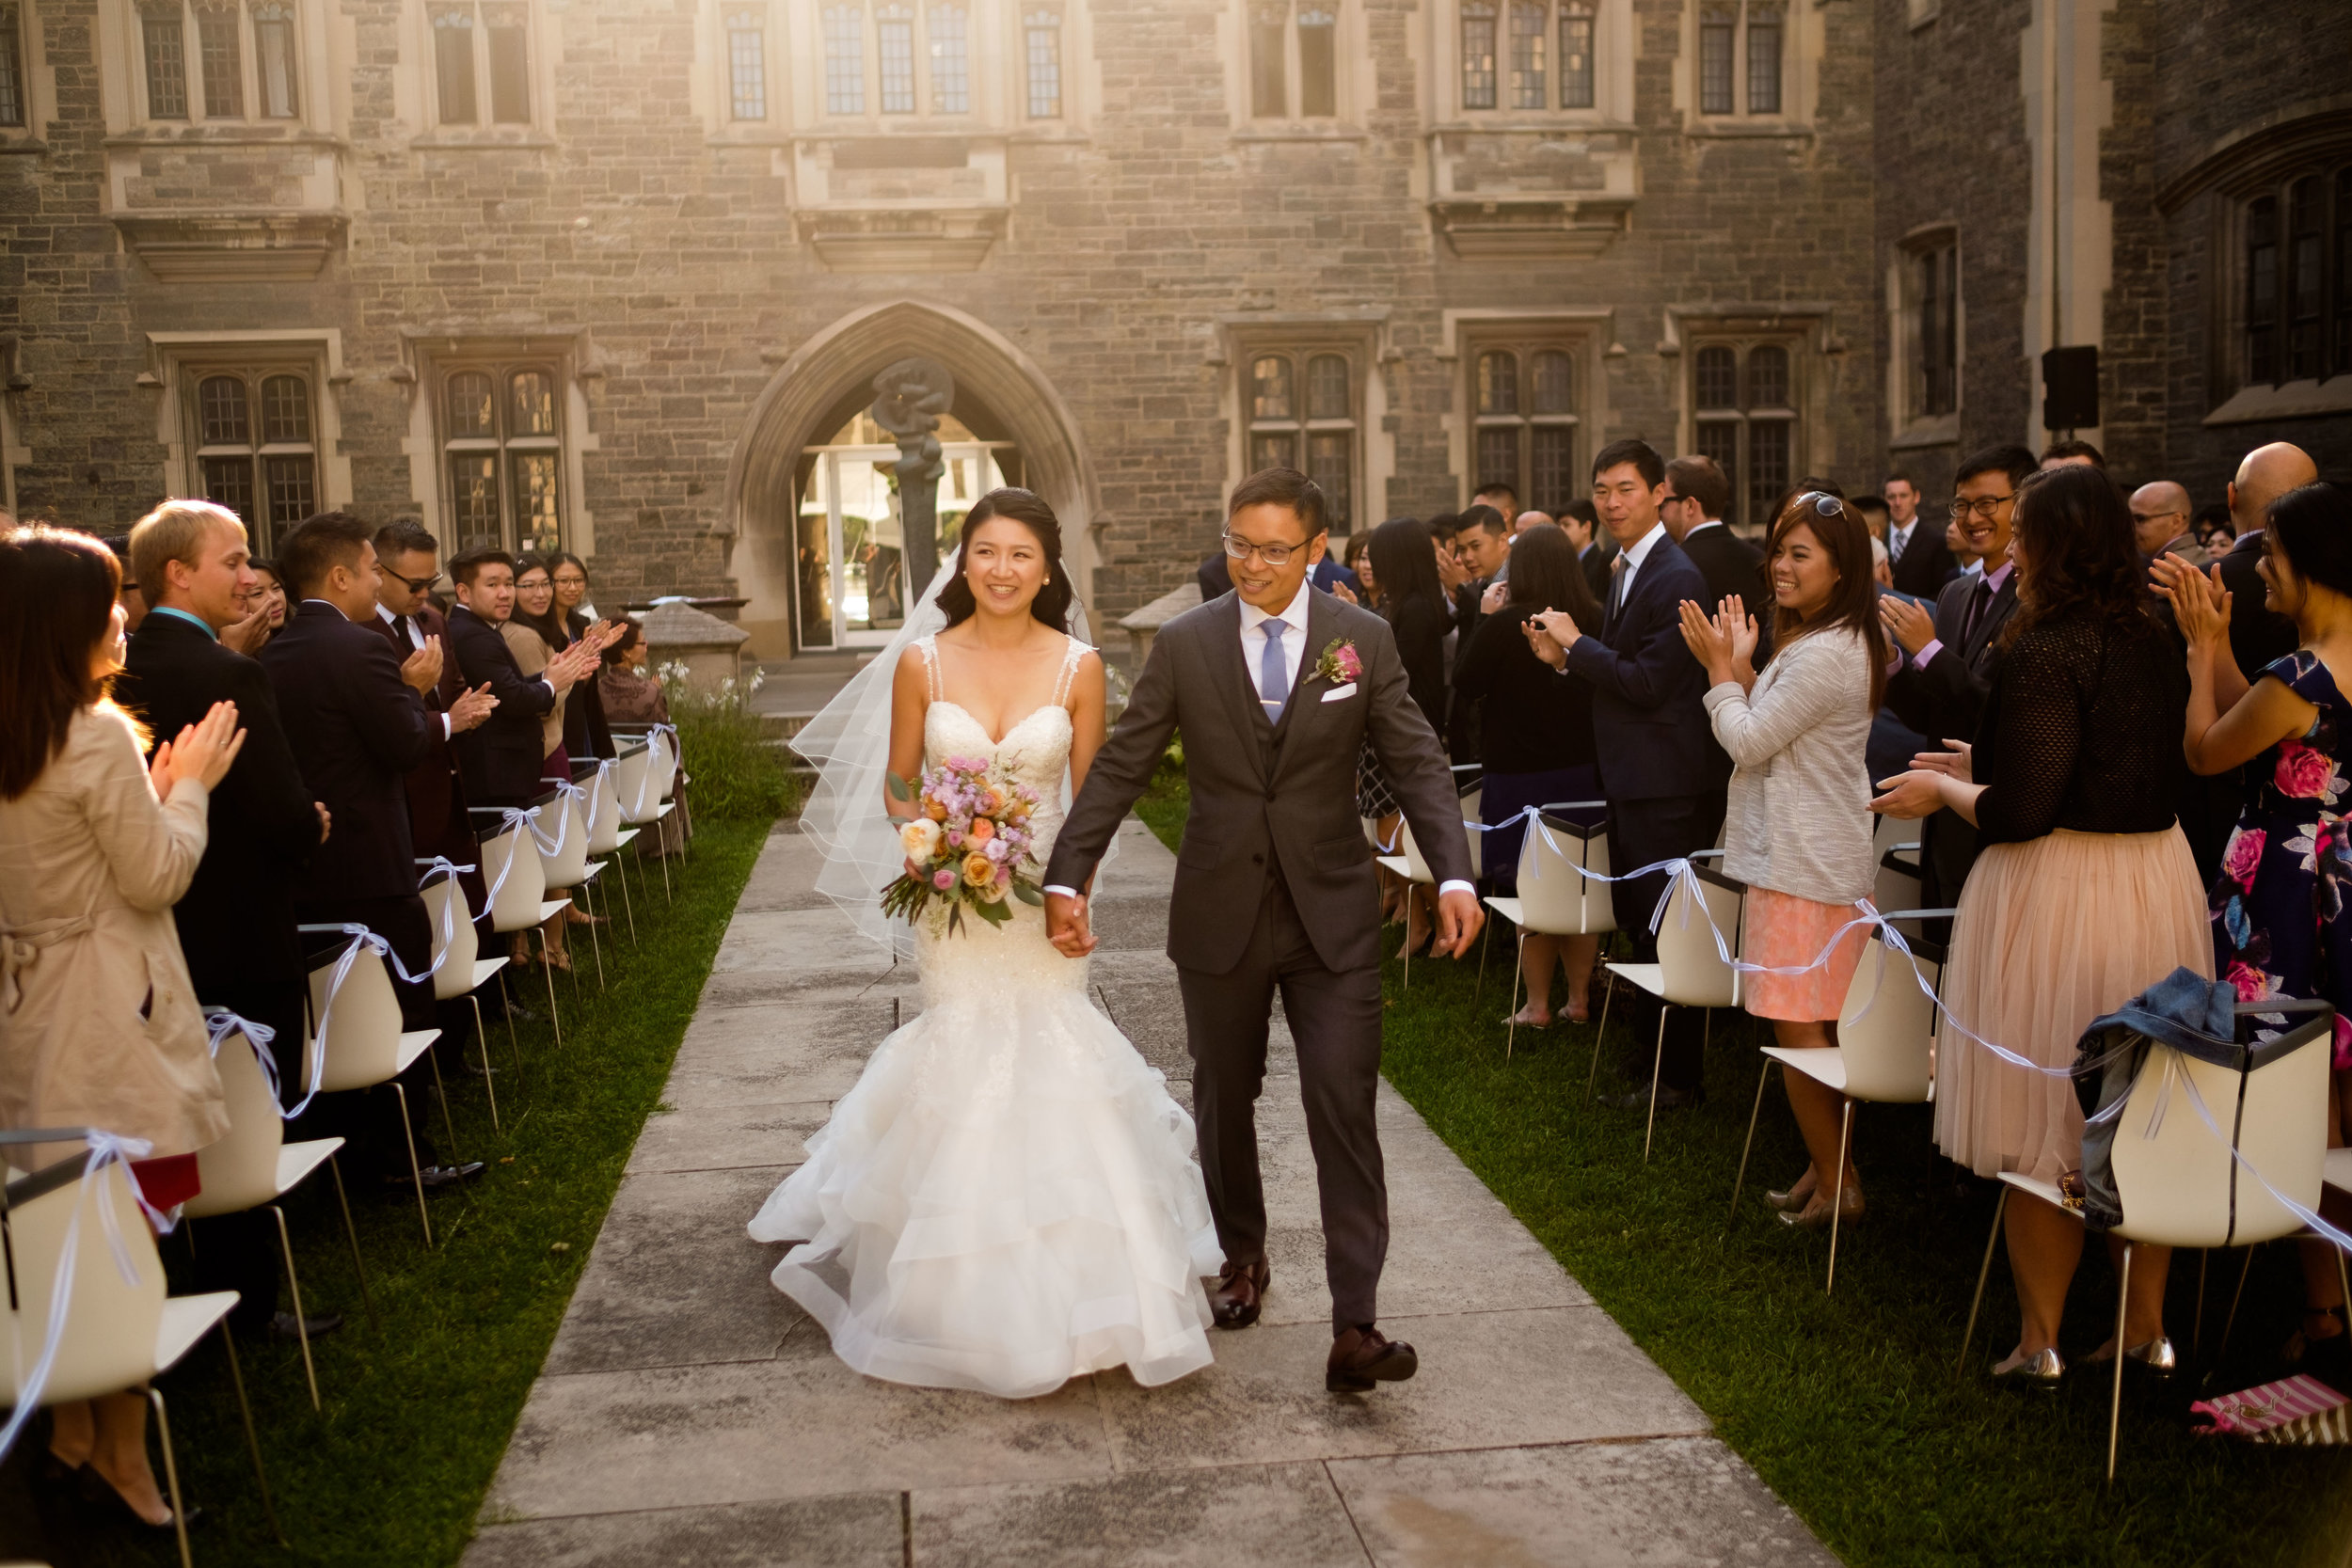  Linda + Andrew walk down the aisle during their outdoor wedding ceremony at the Hart House in Toronto. 